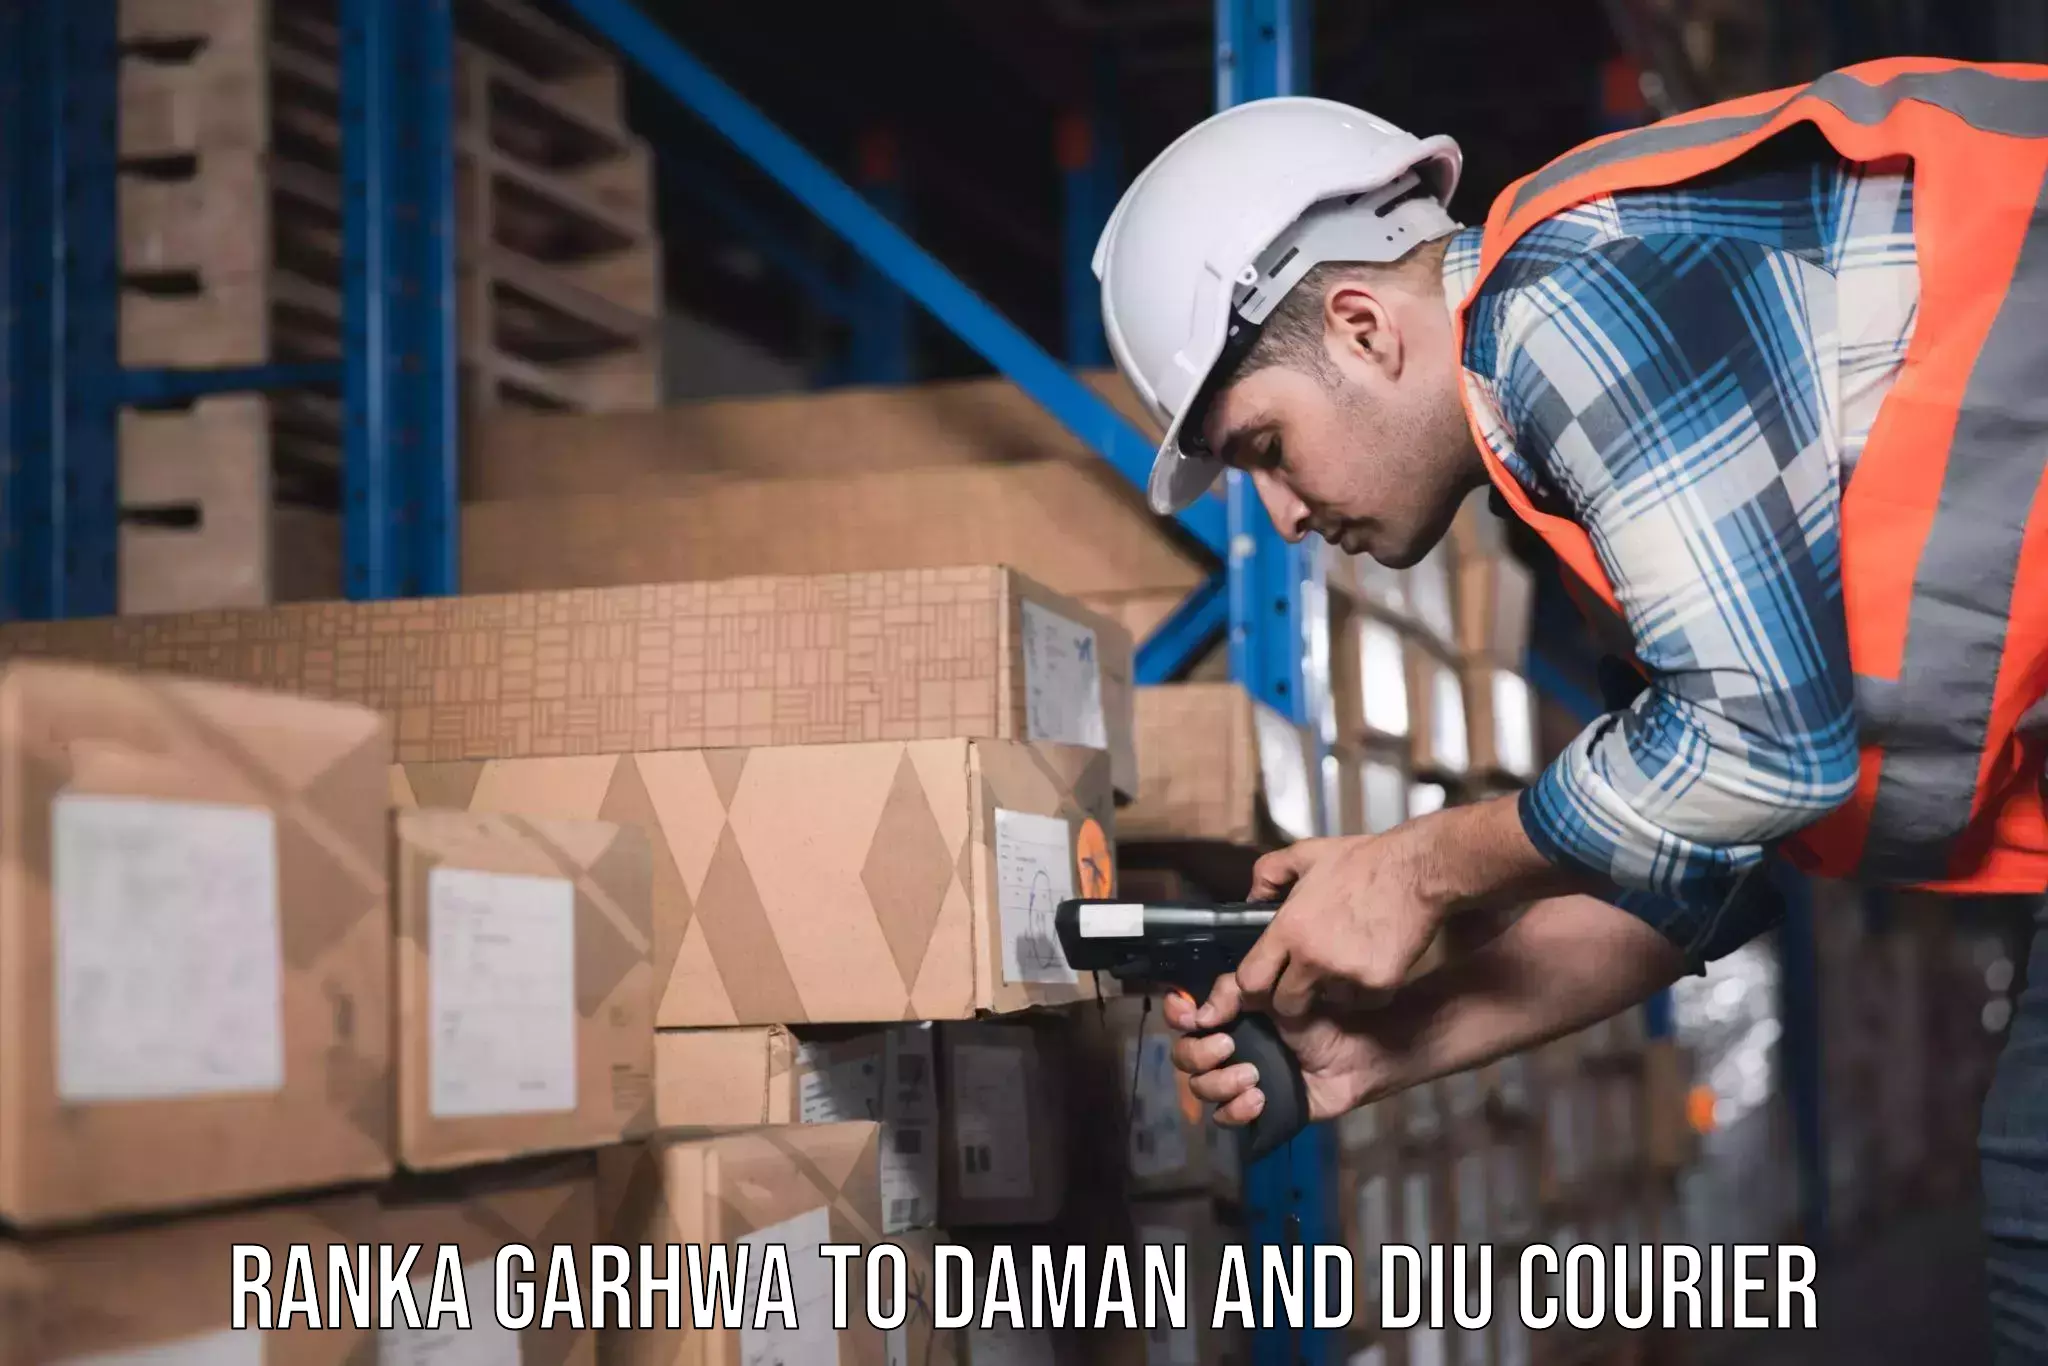 Efficient packing services in Ranka Garhwa to Daman and Diu